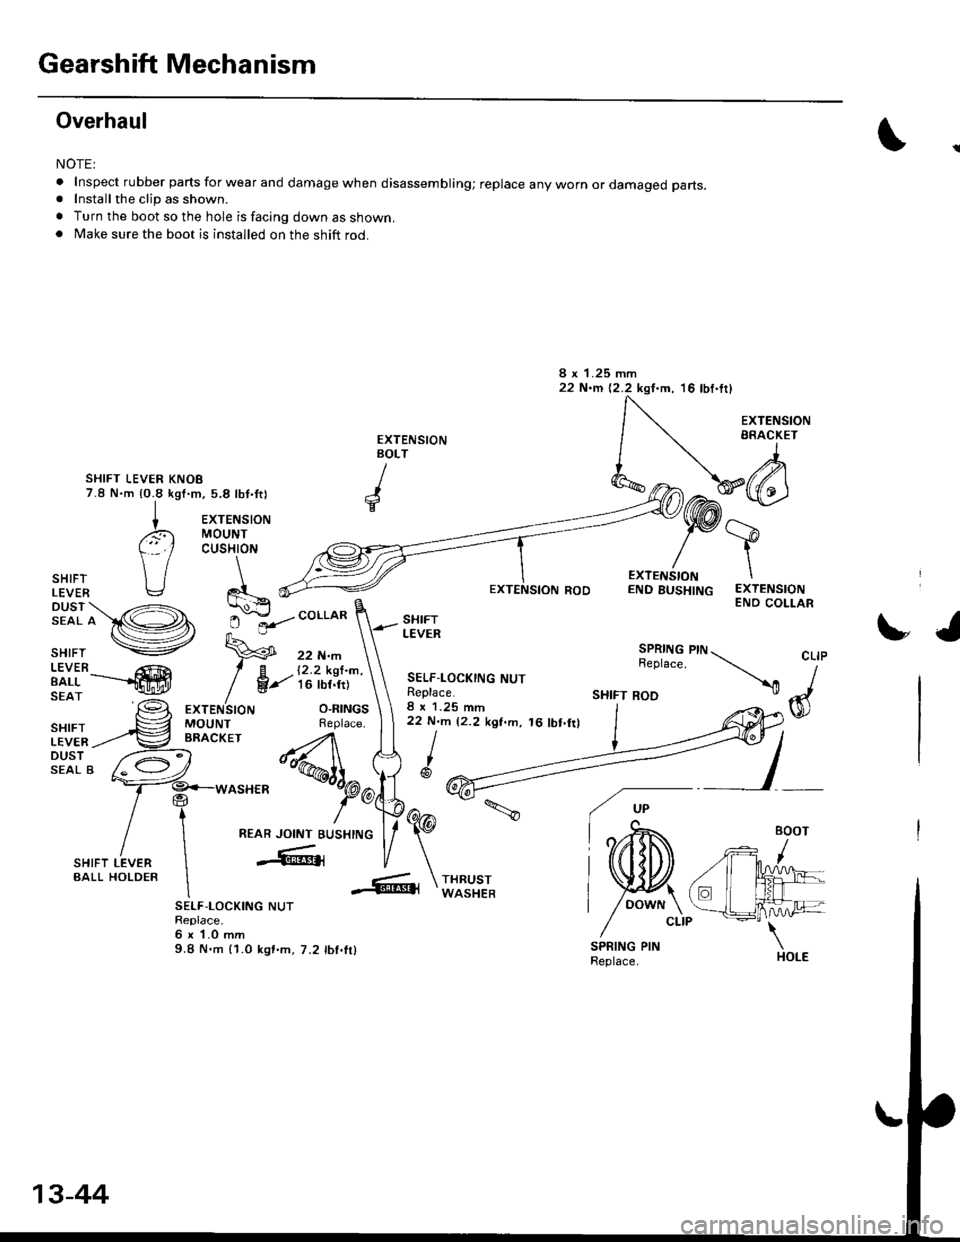 HONDA CIVIC 1998 6.G Workshop Manual Gearshift Mechanism
Overhaul
NOTE:
.Inspectrubberpartsforwearanddamagewhendisassembling;replaceanywornordamagedparts.
. Install the clip as shown.
. Turn the boot so the hole is facing down as shown..